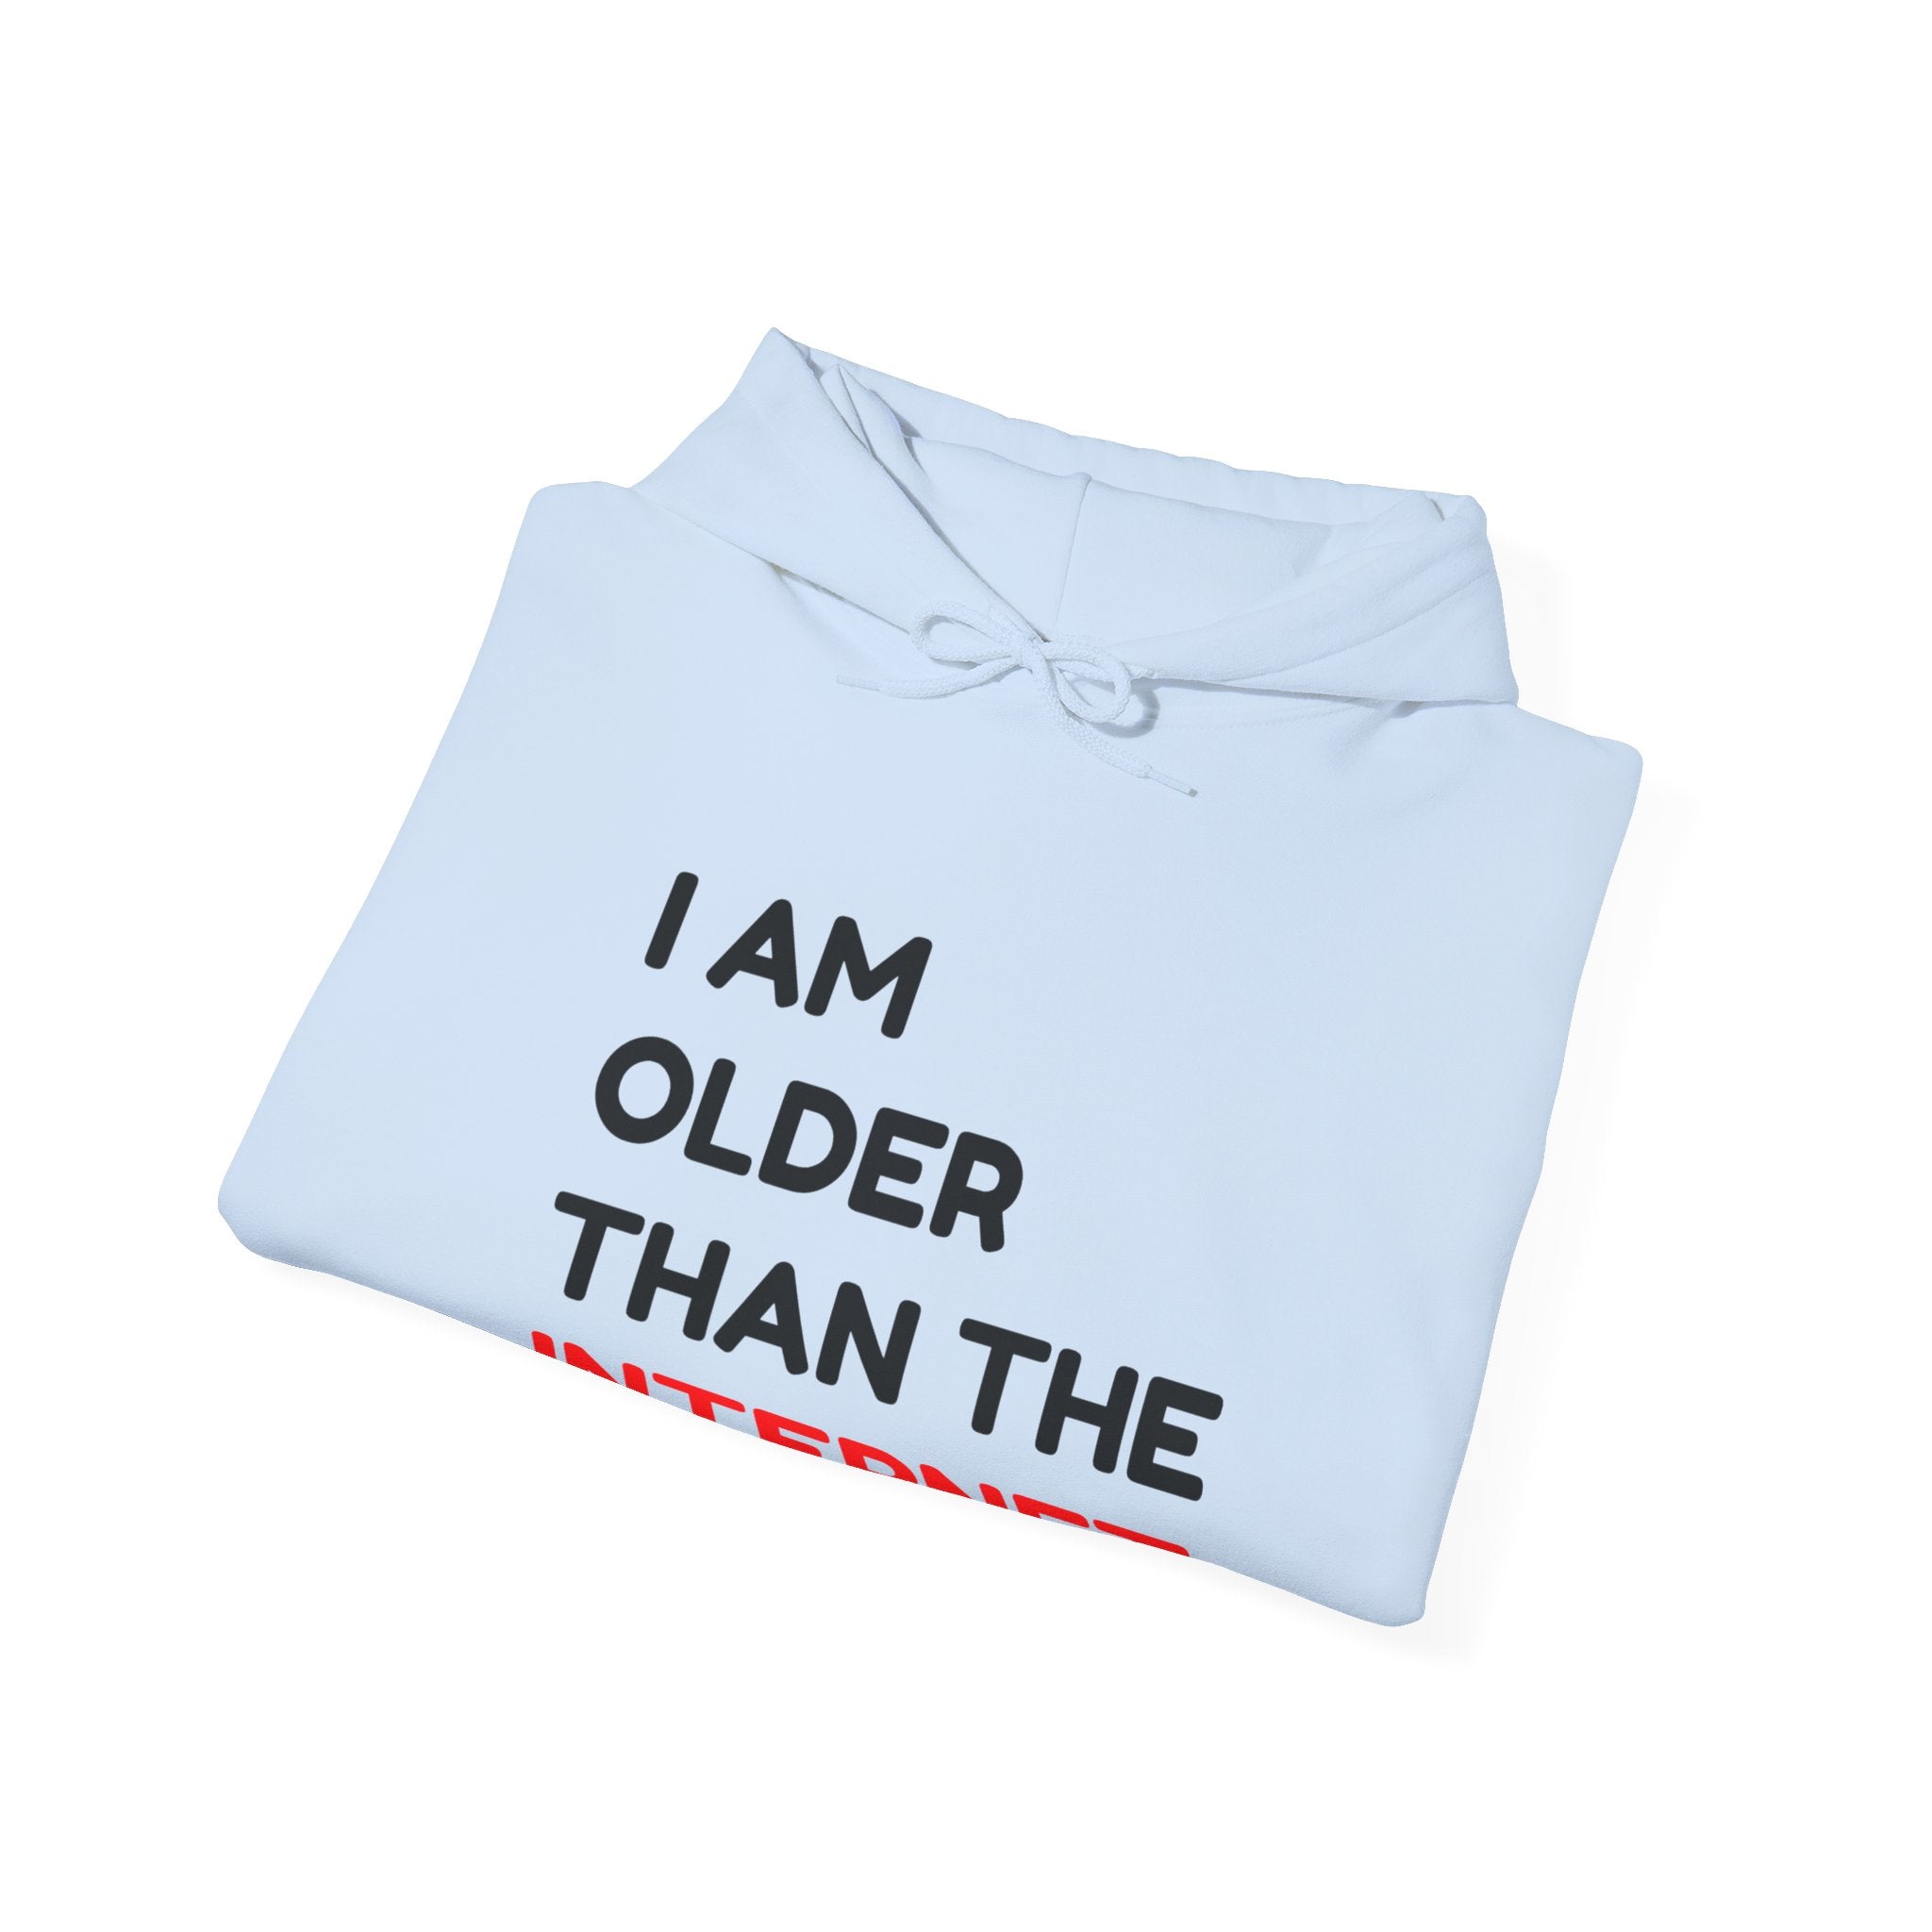 A light blue I am Older Than the Internet - Hooded Sweatshirt with black text reading "I AM OLDER THAN THE INTERNET" laid flat against a white background, offering a cozy fit.